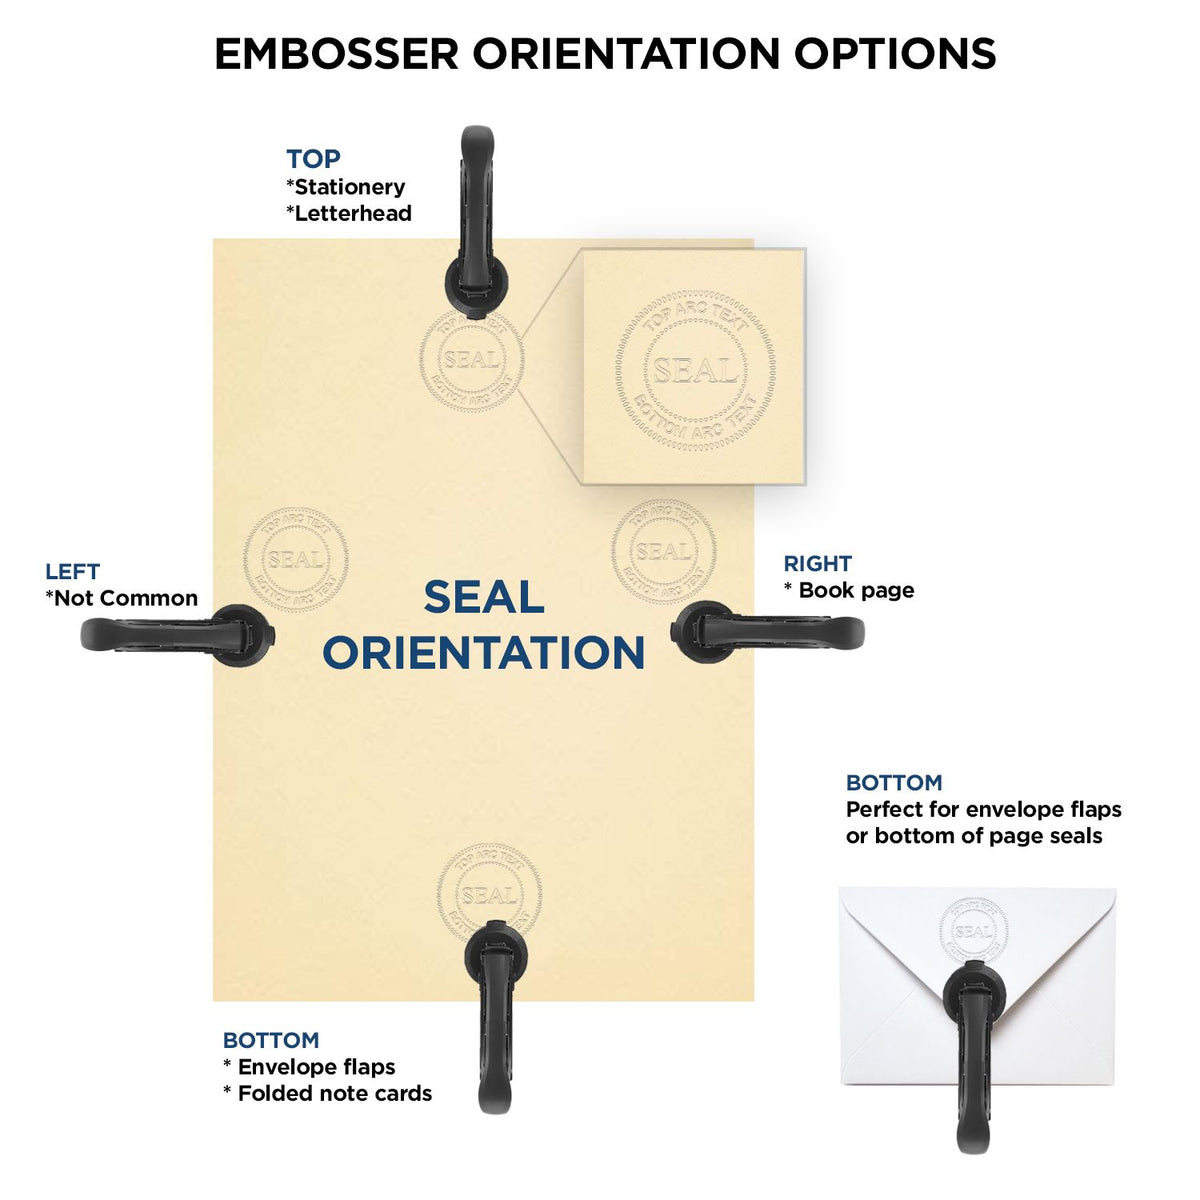 An infographic for the Gift Hawaii Architect Seal showing embosser orientation, this is showing examples of a top, bottom, right and left insert.